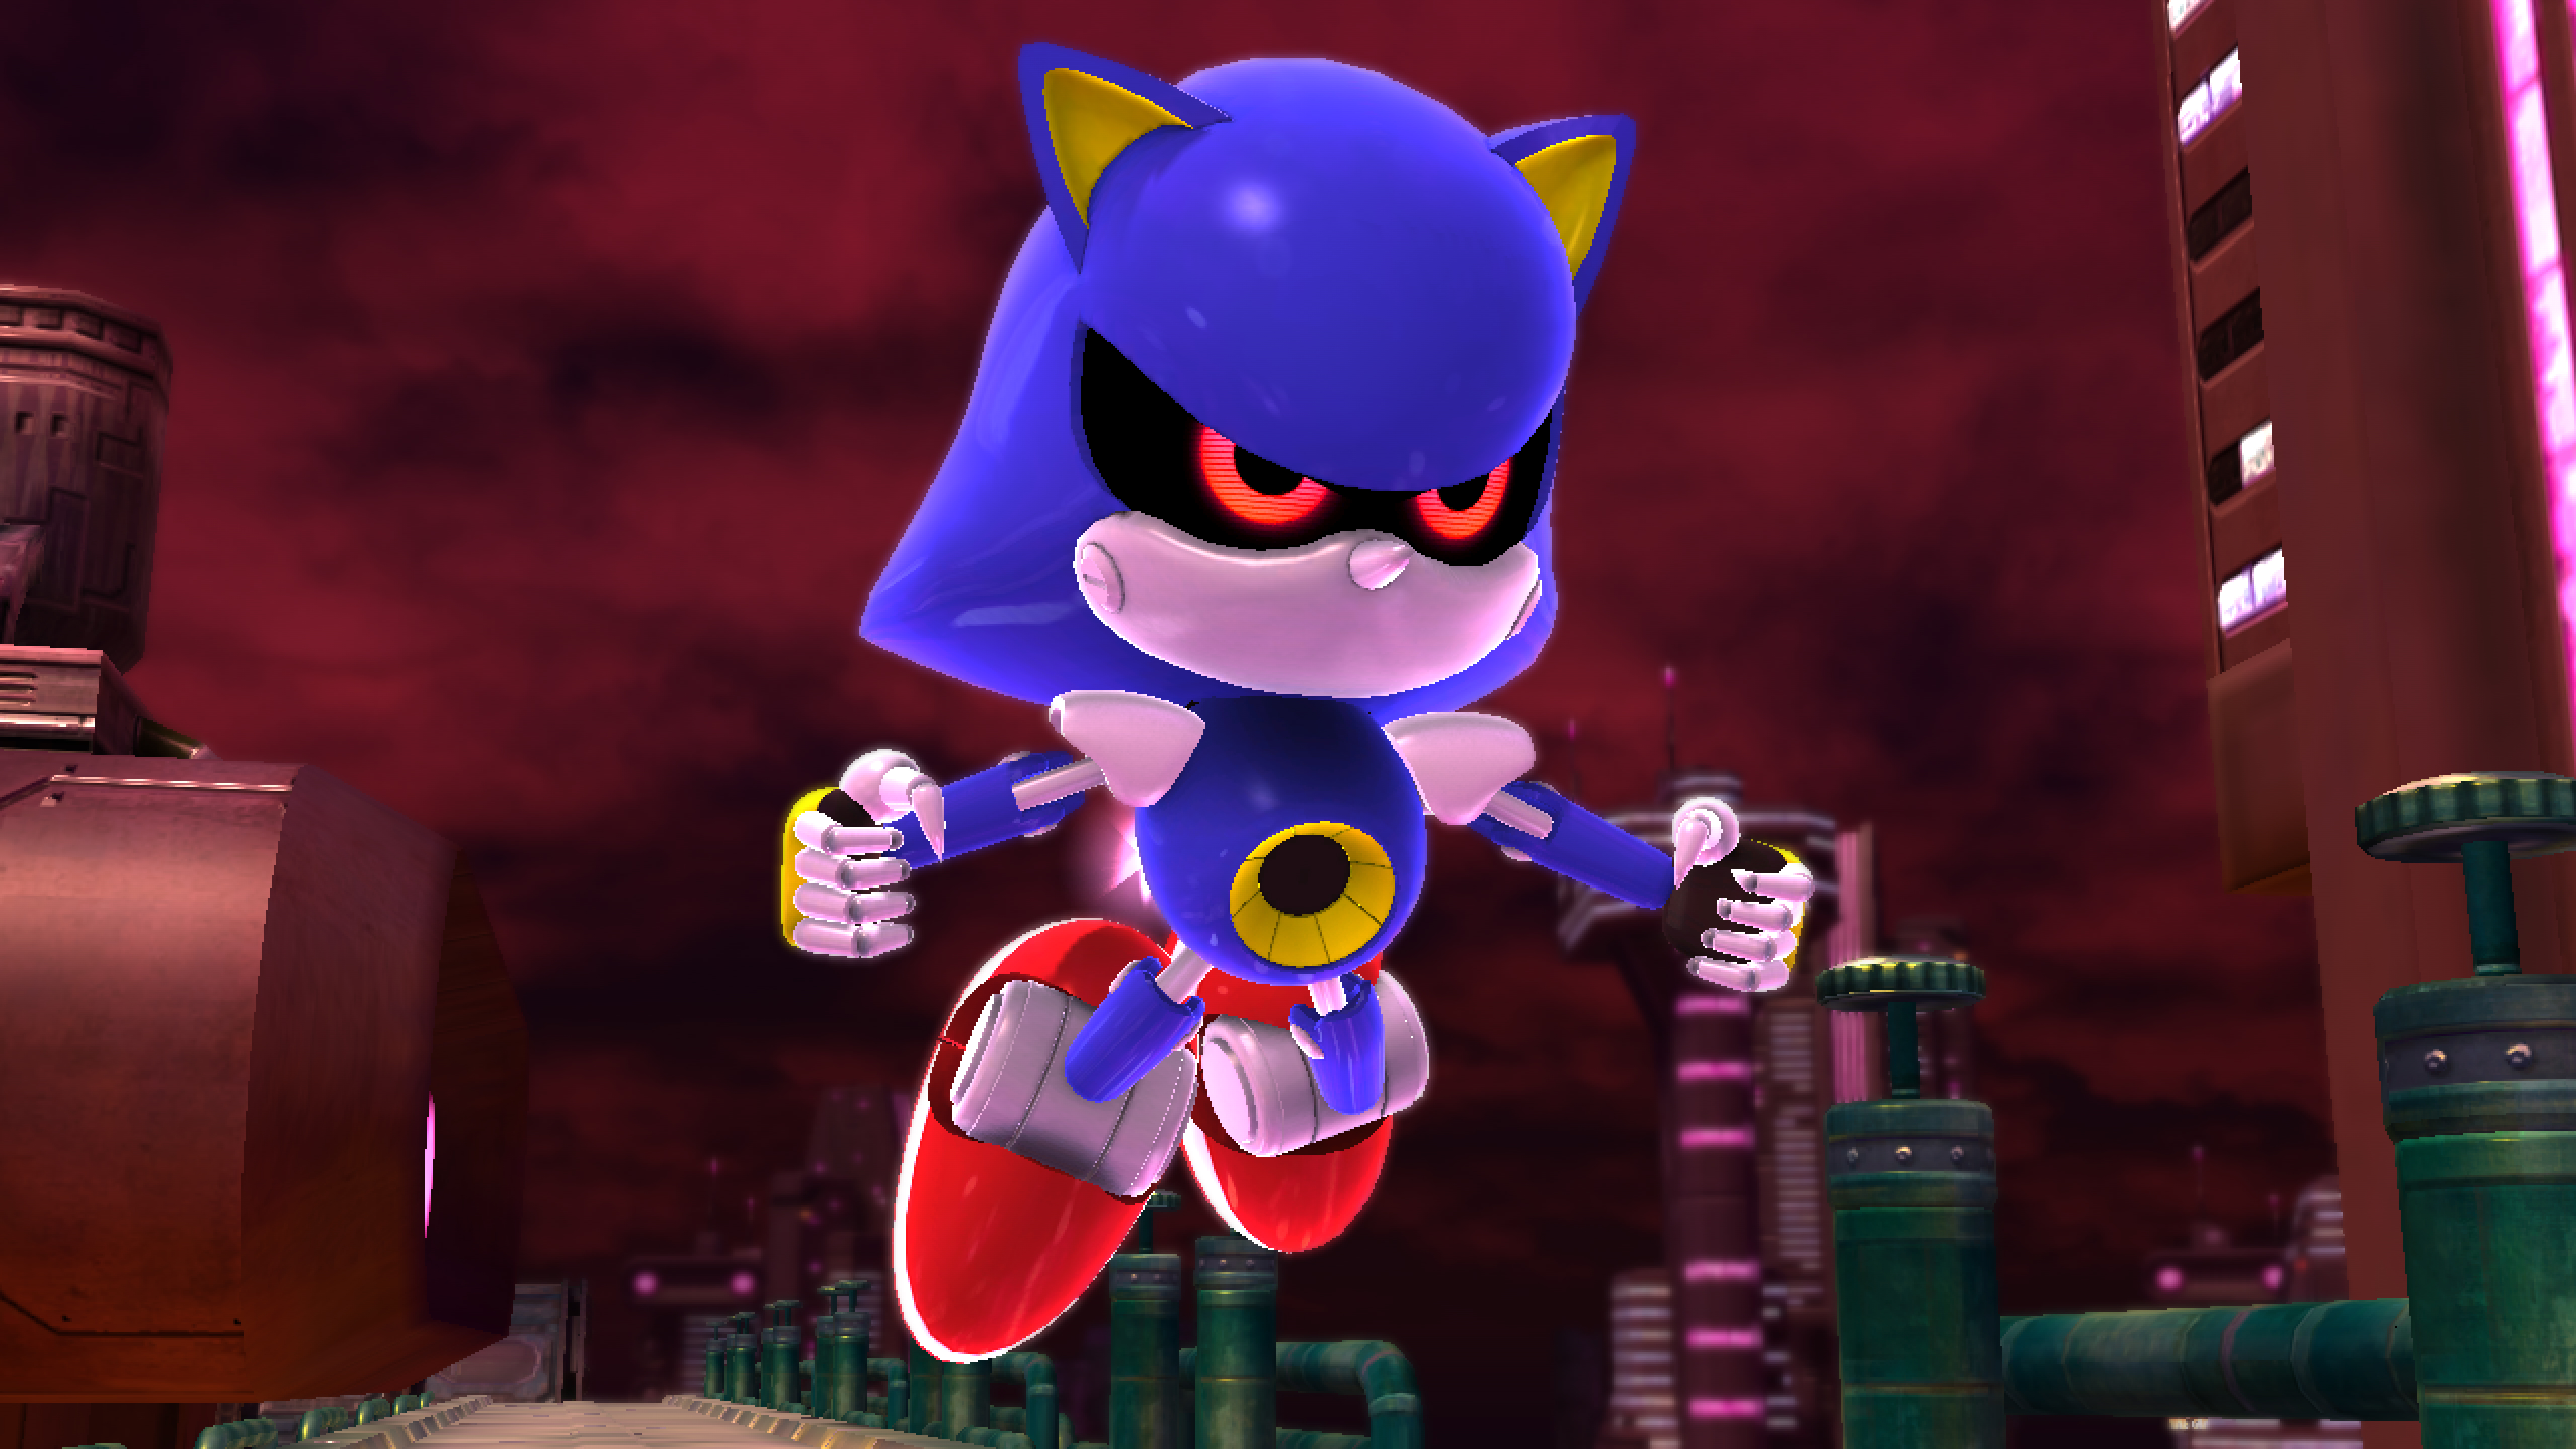 Metal Sonic - The Wasted Rival 